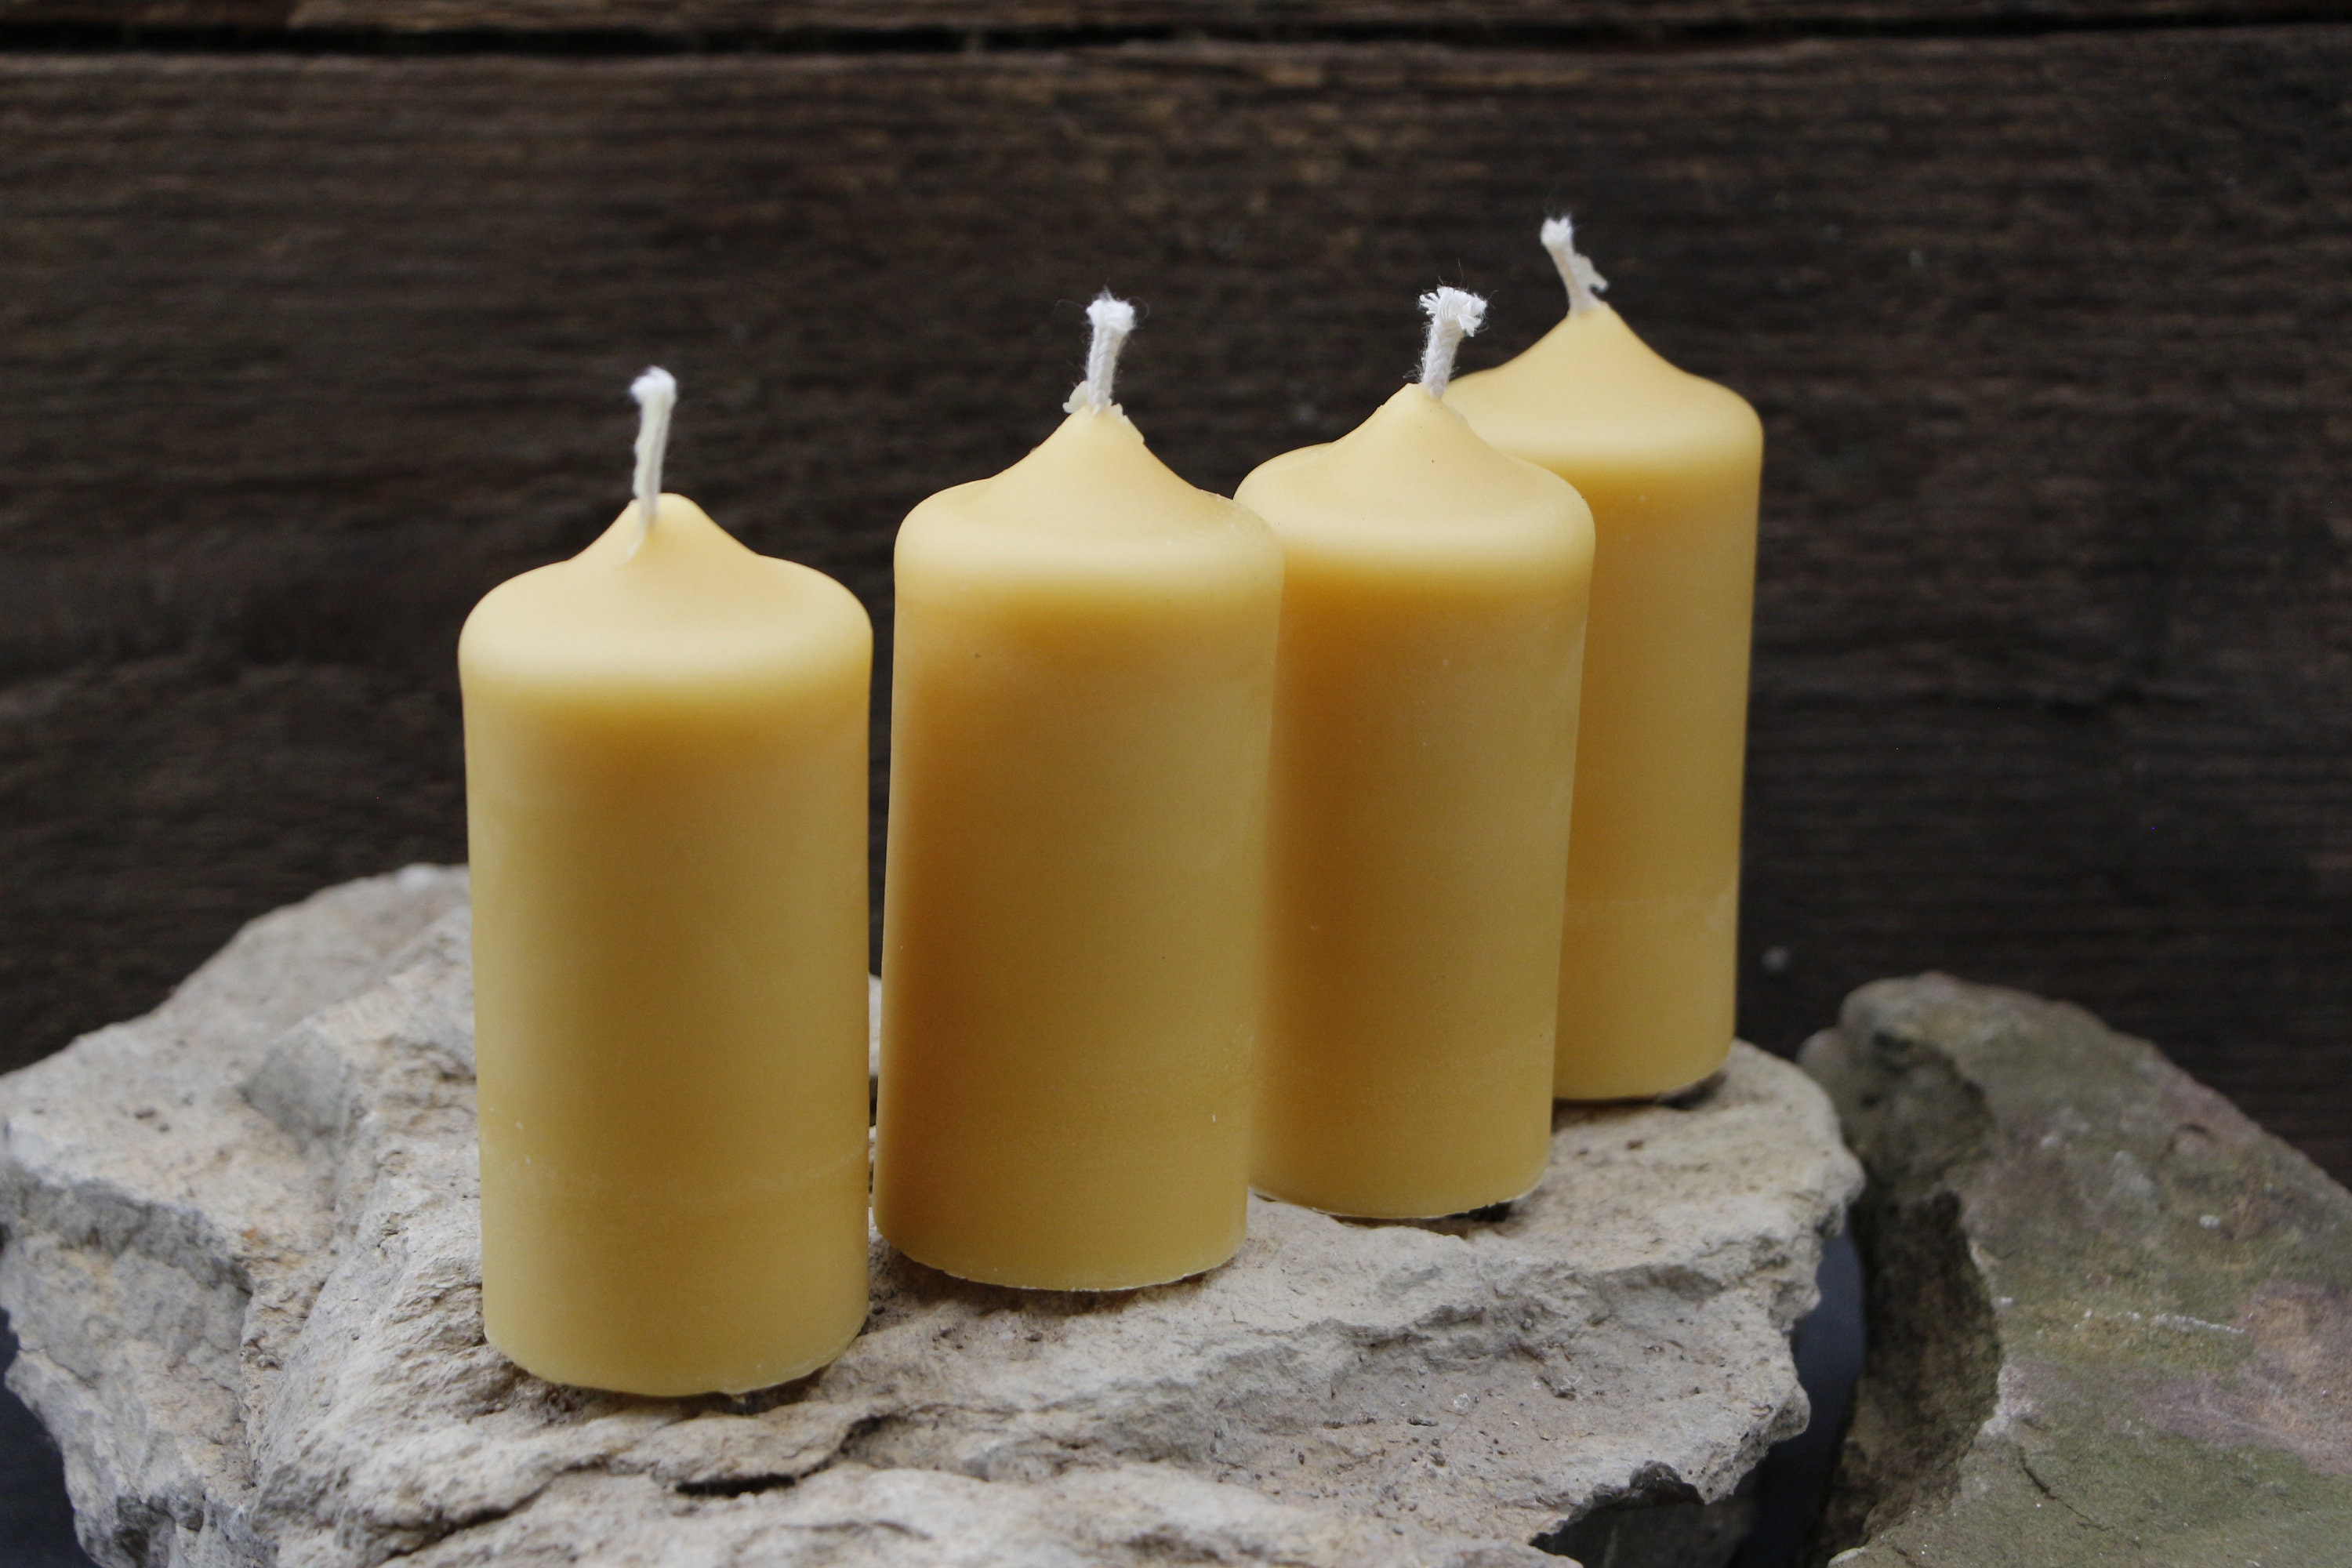 Wholesale White Beeswax for Candle Making - China Refined Bees Wax